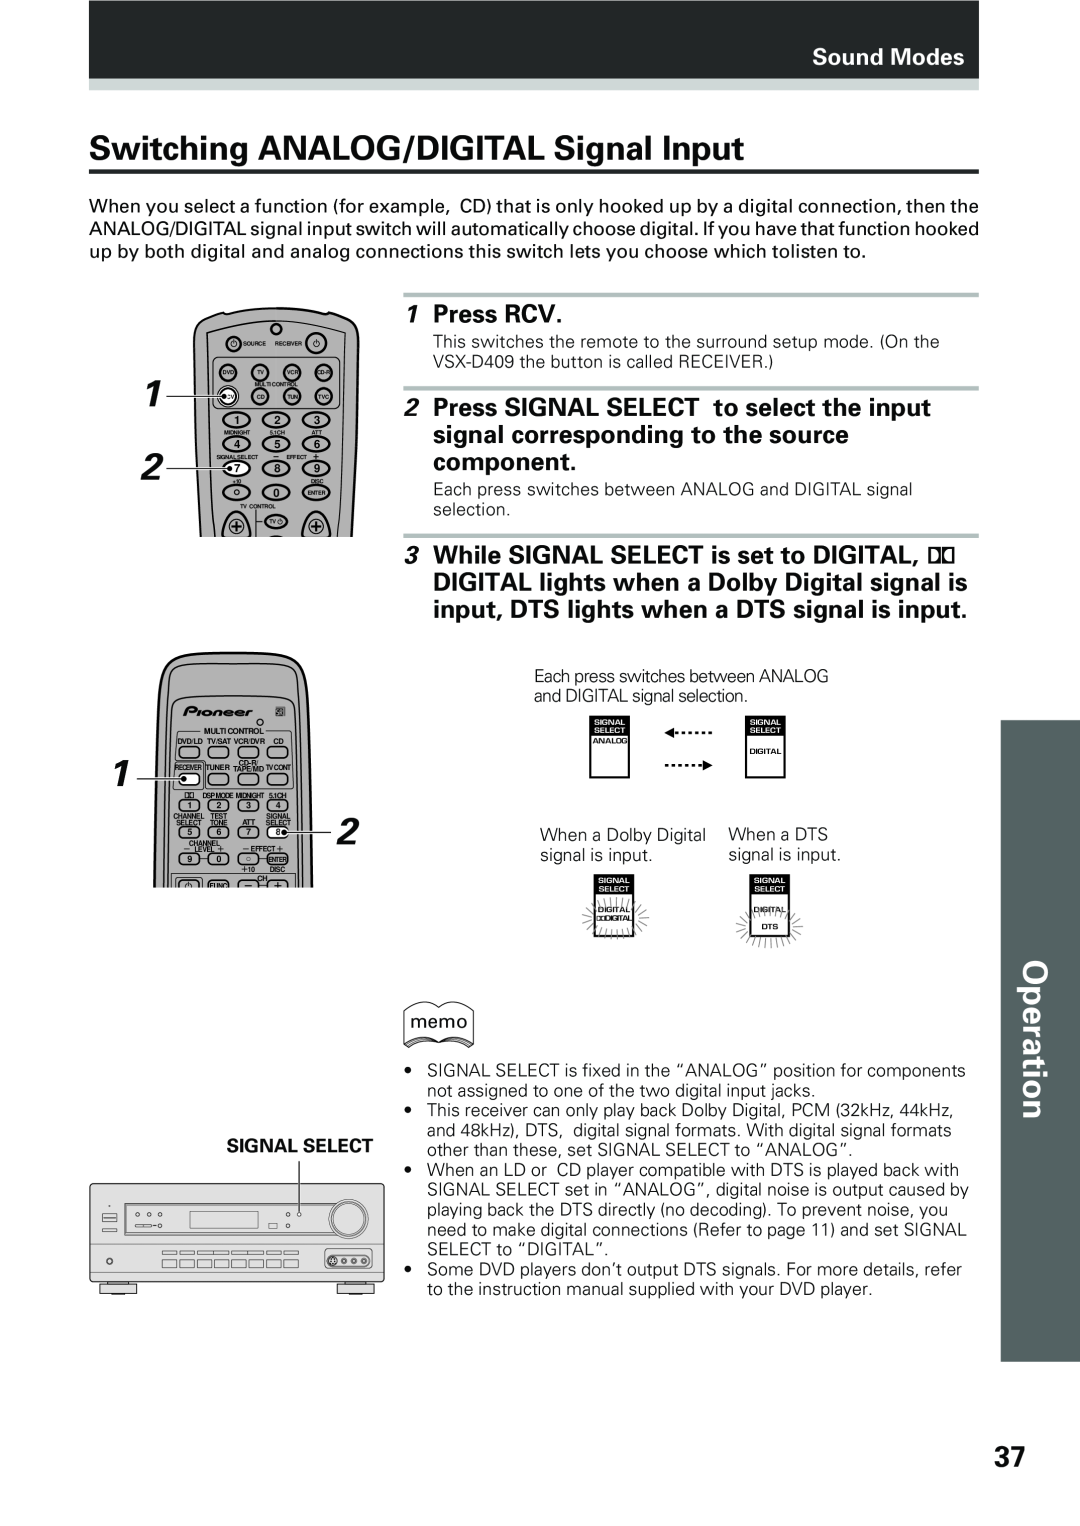 Pioneer VSX-D409 Switching ANALOG/DIGITAL Signal Input, Press SIGNAL SELECT to select the input, component, Operation 